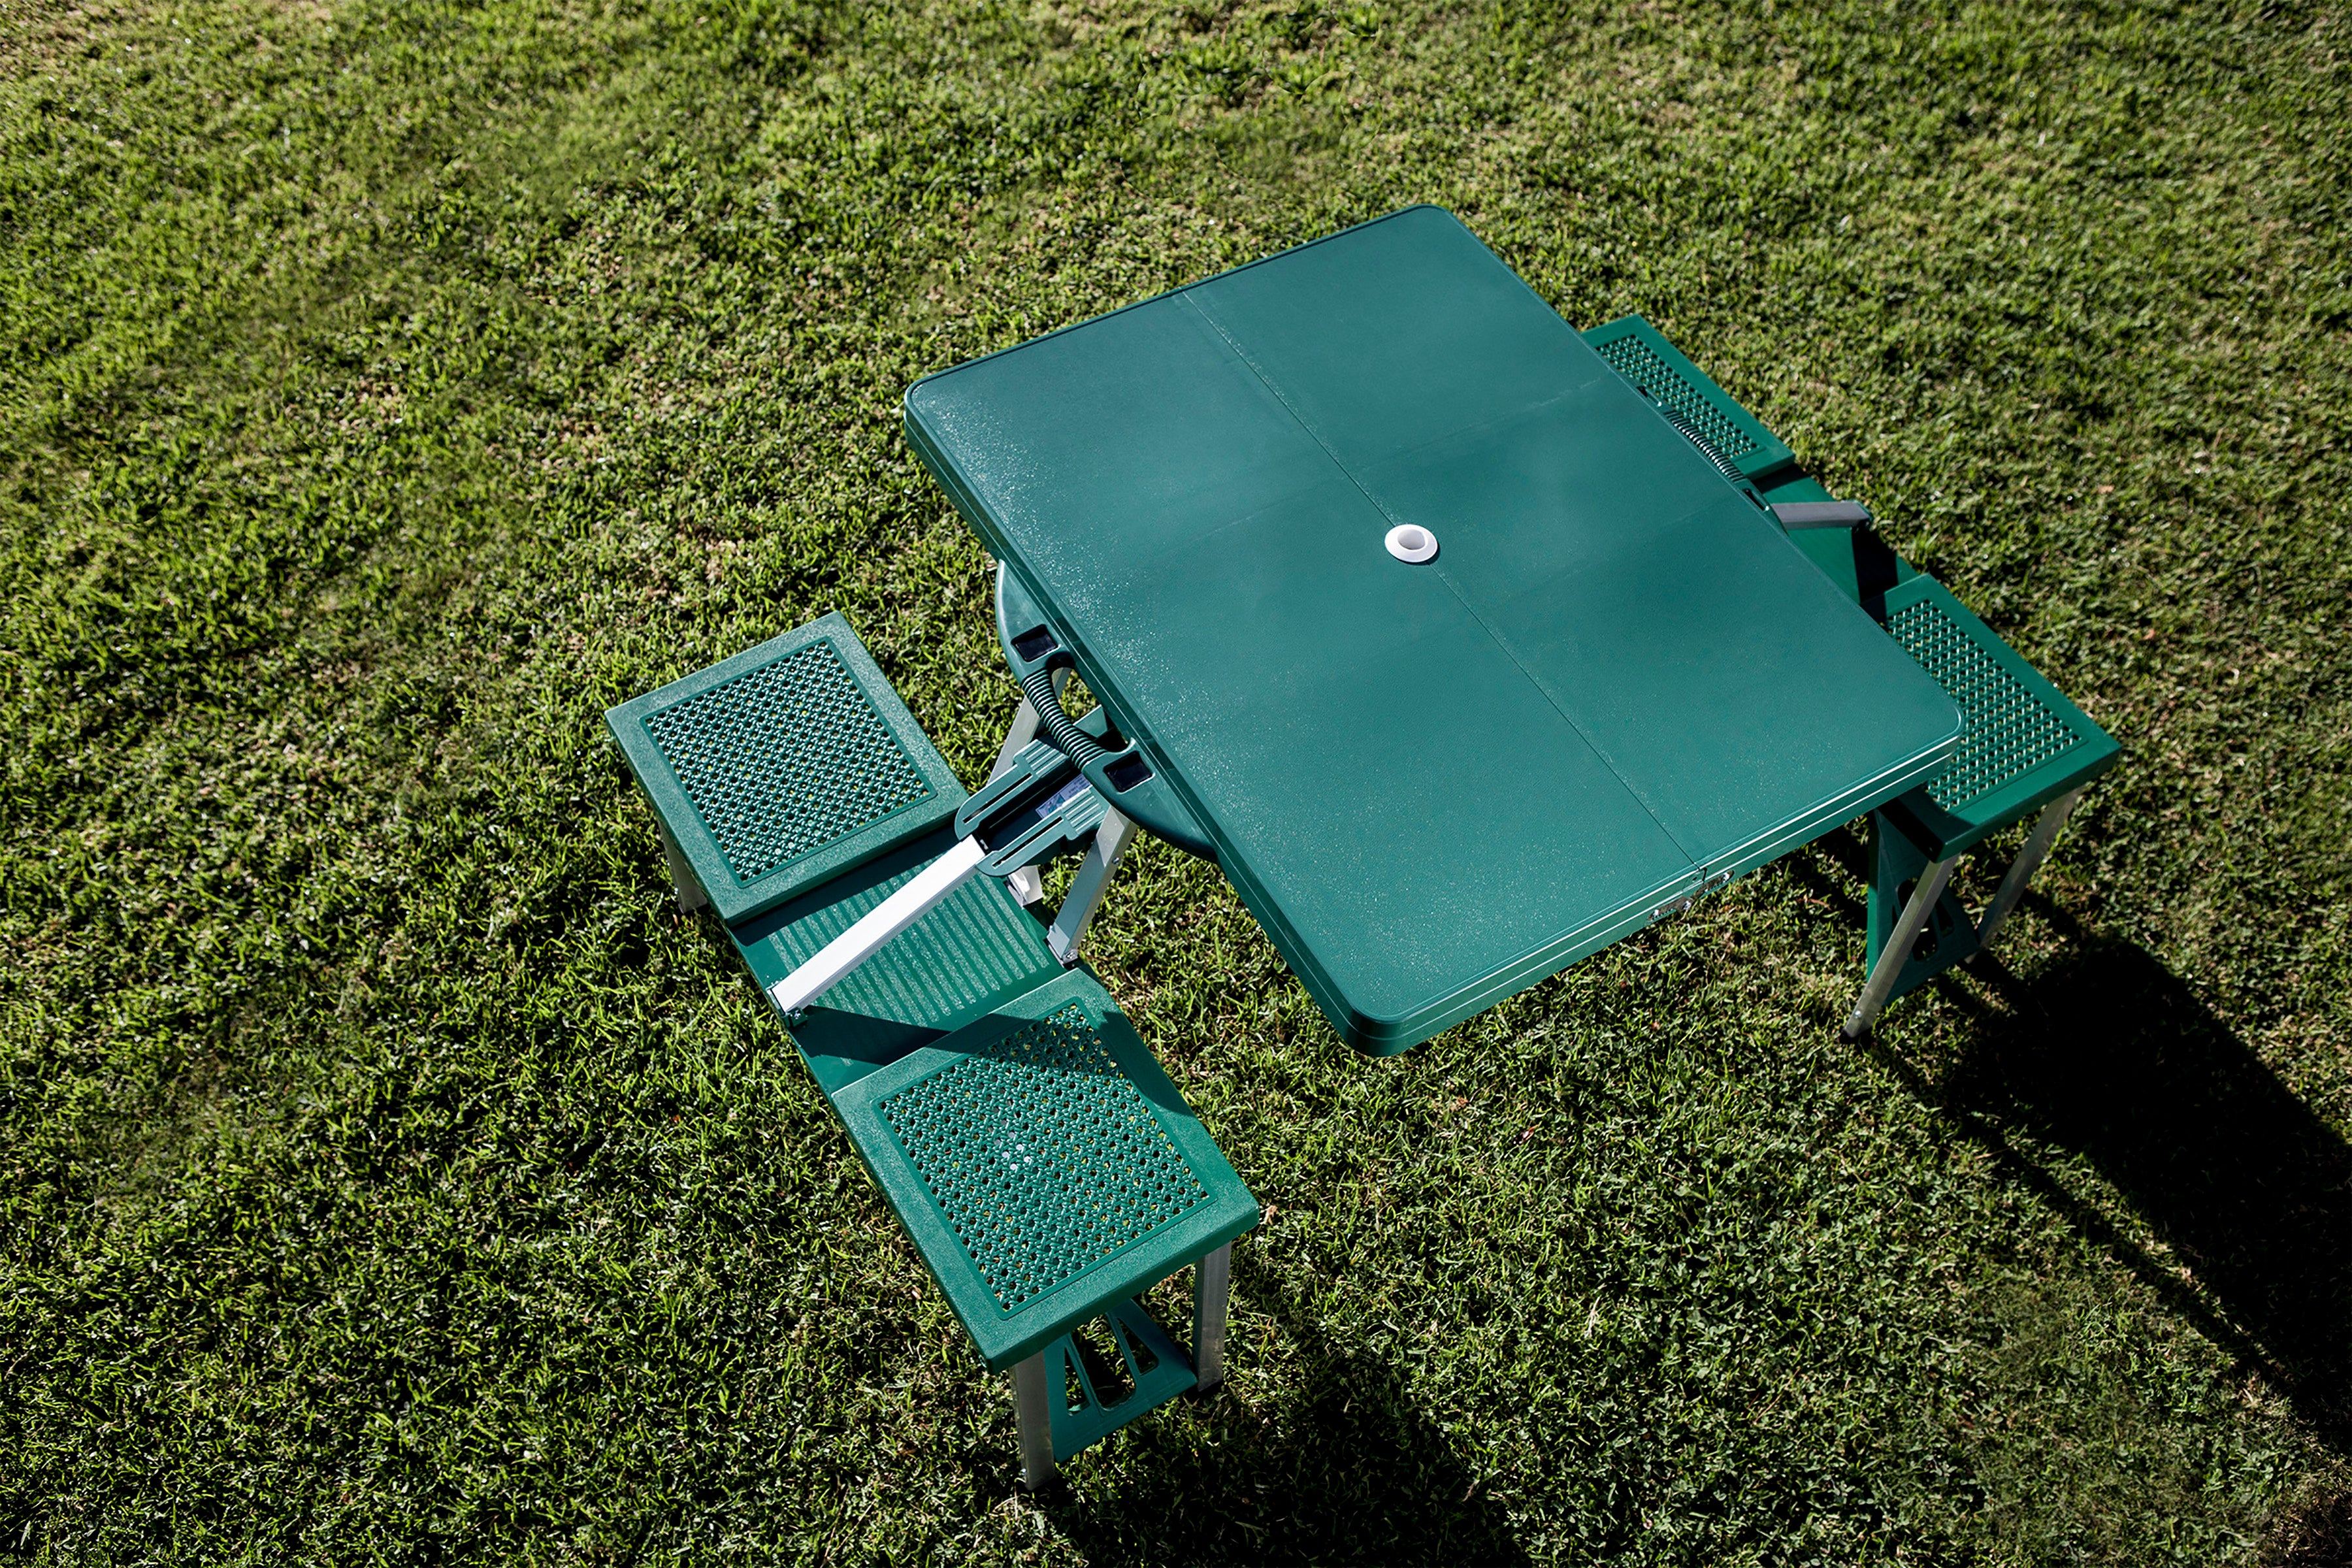 Colorado State Rams - Picnic Table Portable Folding Table with Seats